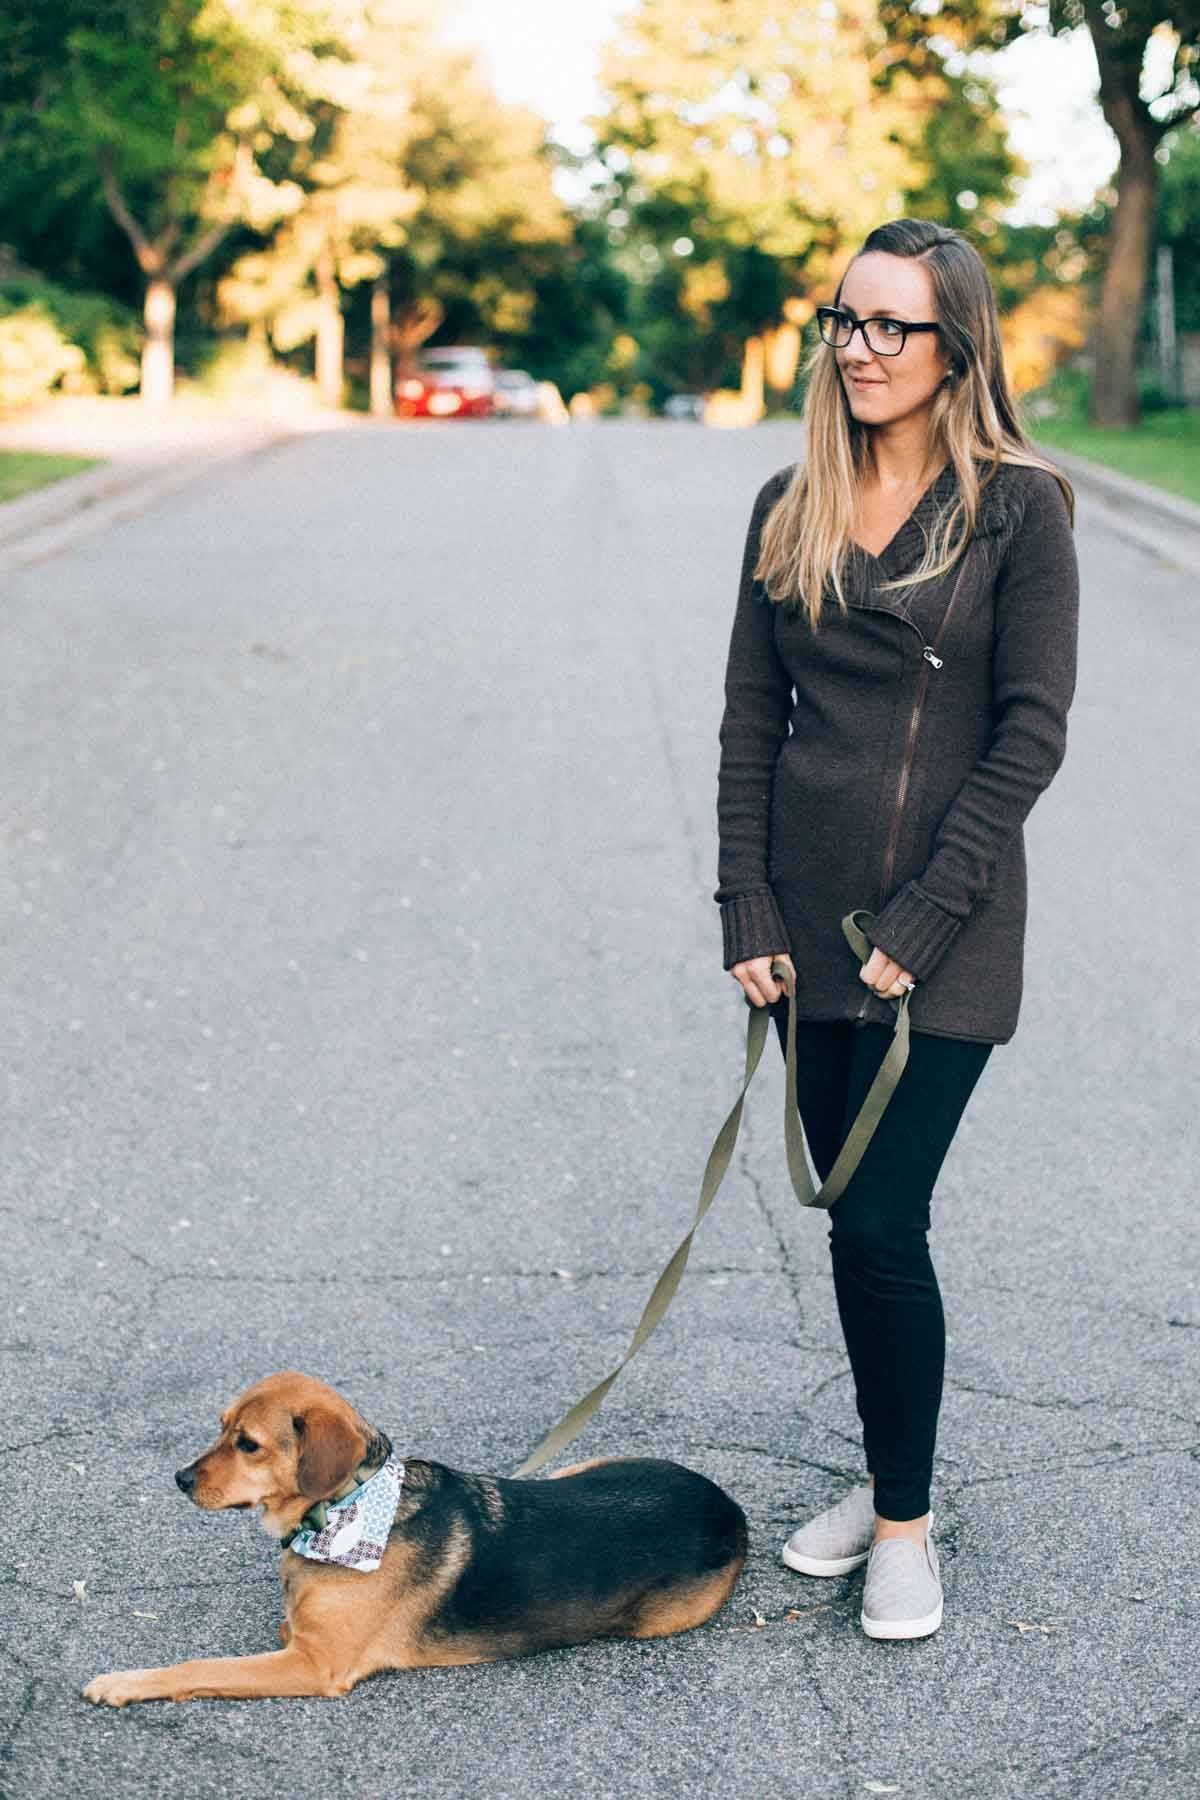 dog and woman standing on a road